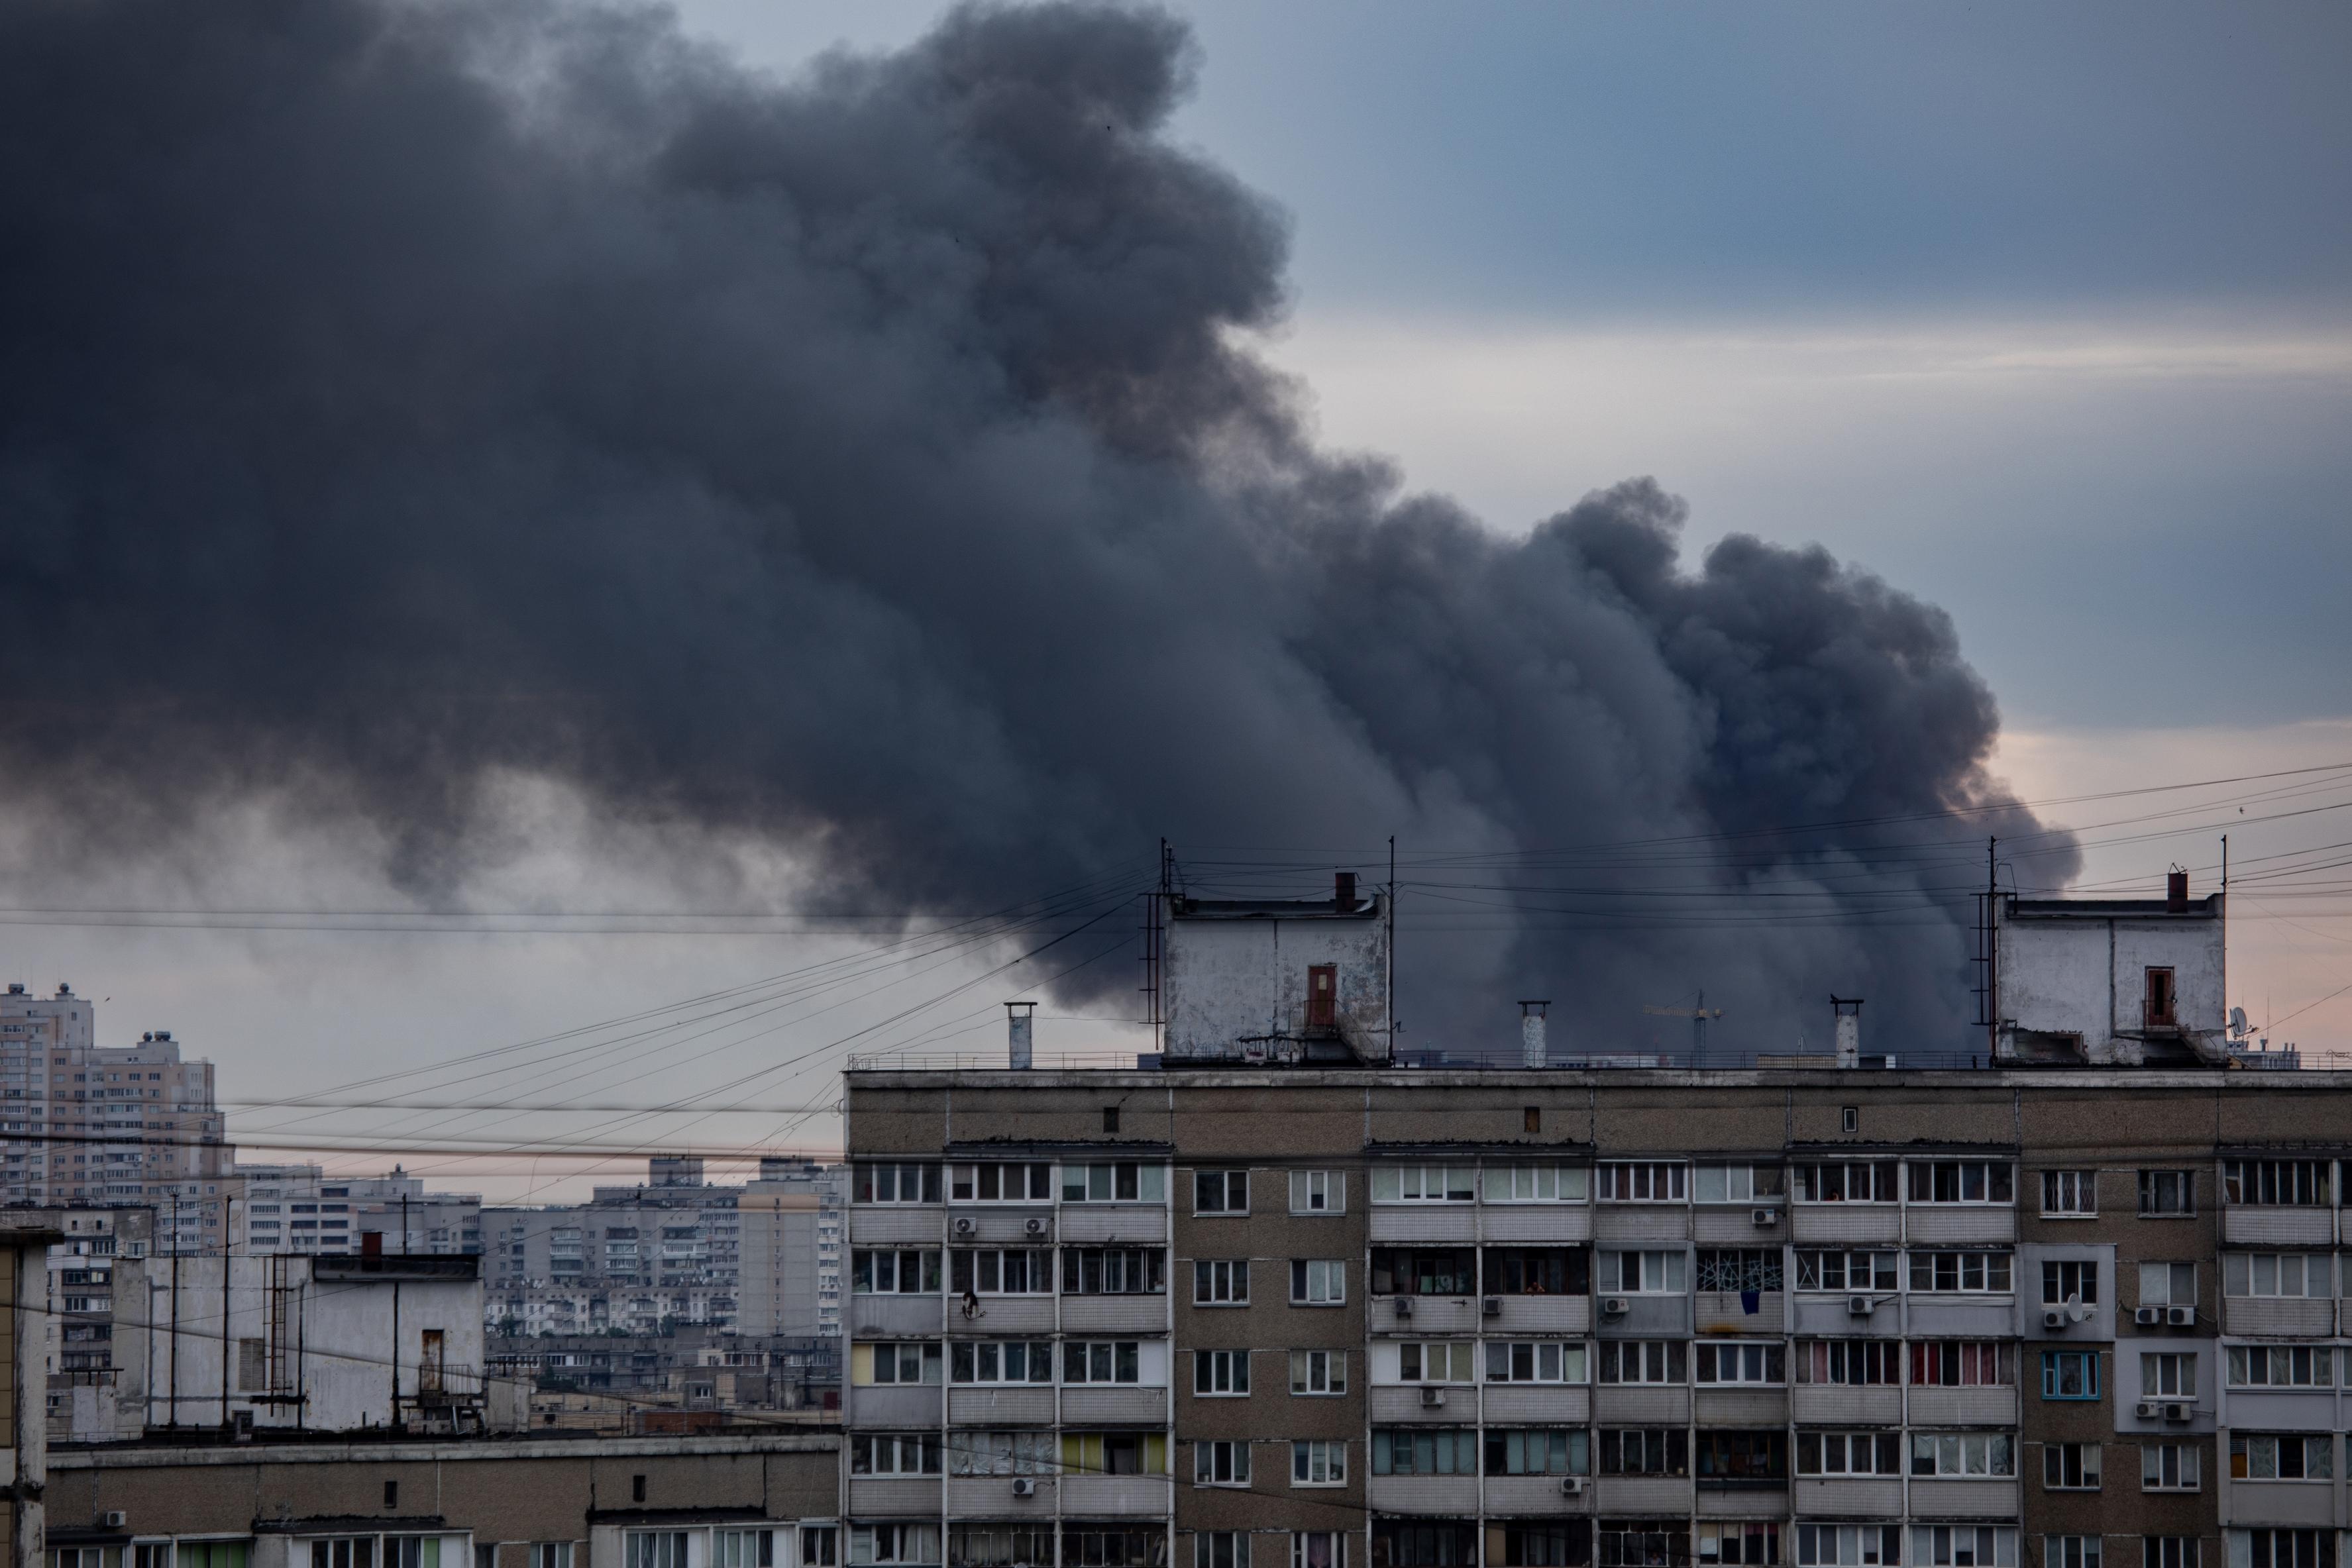 KYIV, UKRAINE - JUN 05, 2022: Kyiv rocked by blasts from Russian cruise missiles. Smoke rises over residents houses after missile strikes, as Russia's attack on Ukraine continues, in Kyiv, Ukraine.